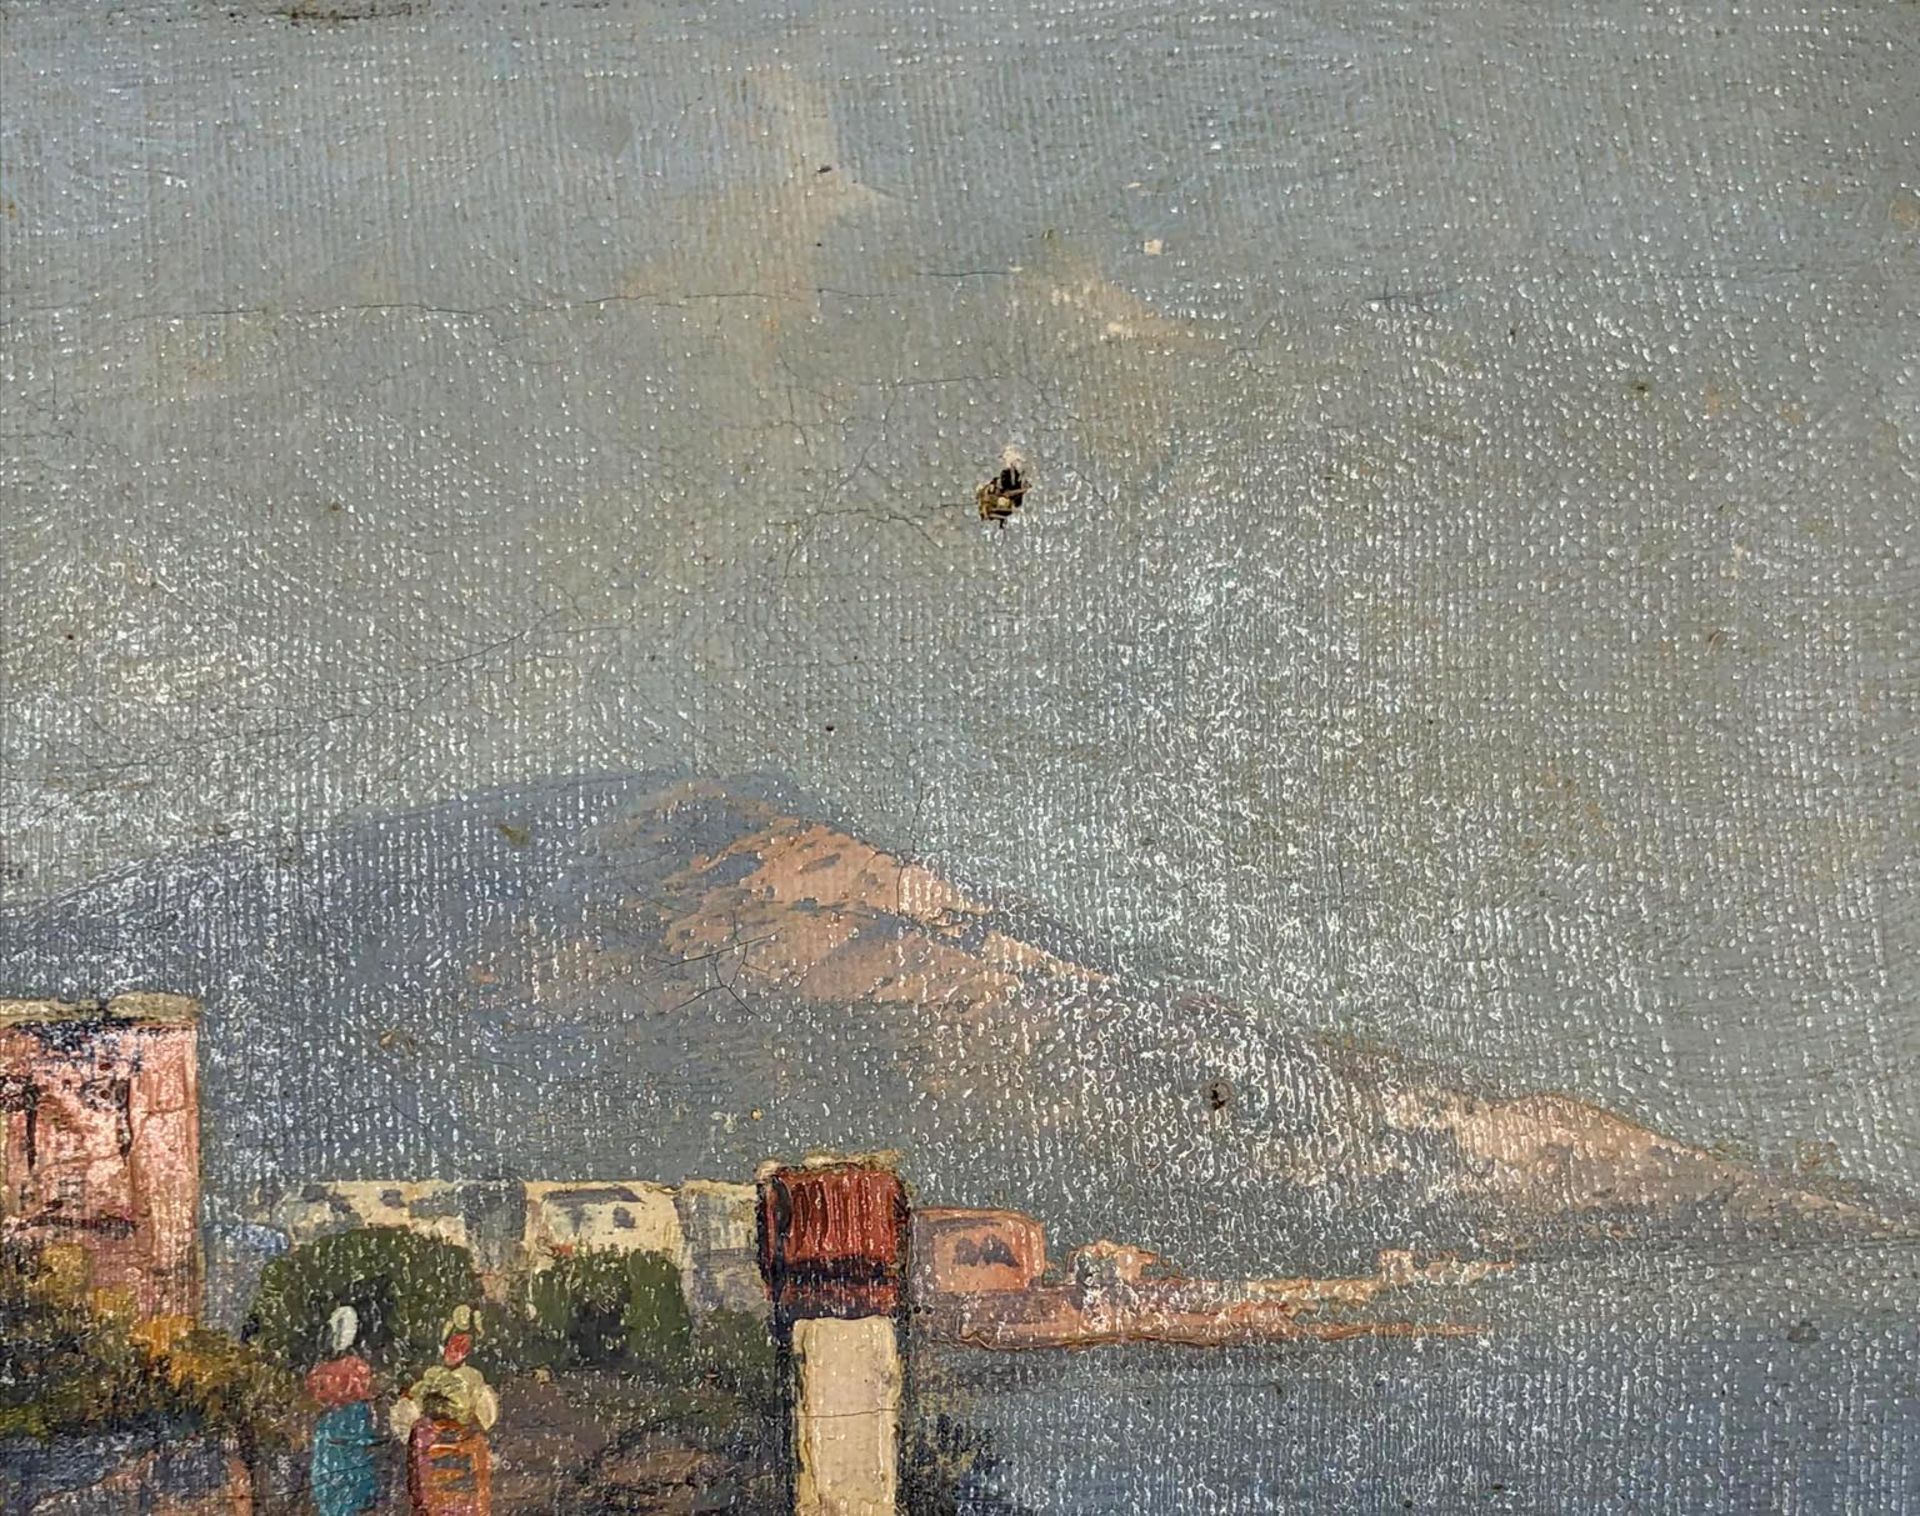 Georg FISCHHOF (1859 - 1914). Gulf of Naples with Vesuvius.19 cm x 32 cm. Painting. Oil on canvas. - Image 5 of 6